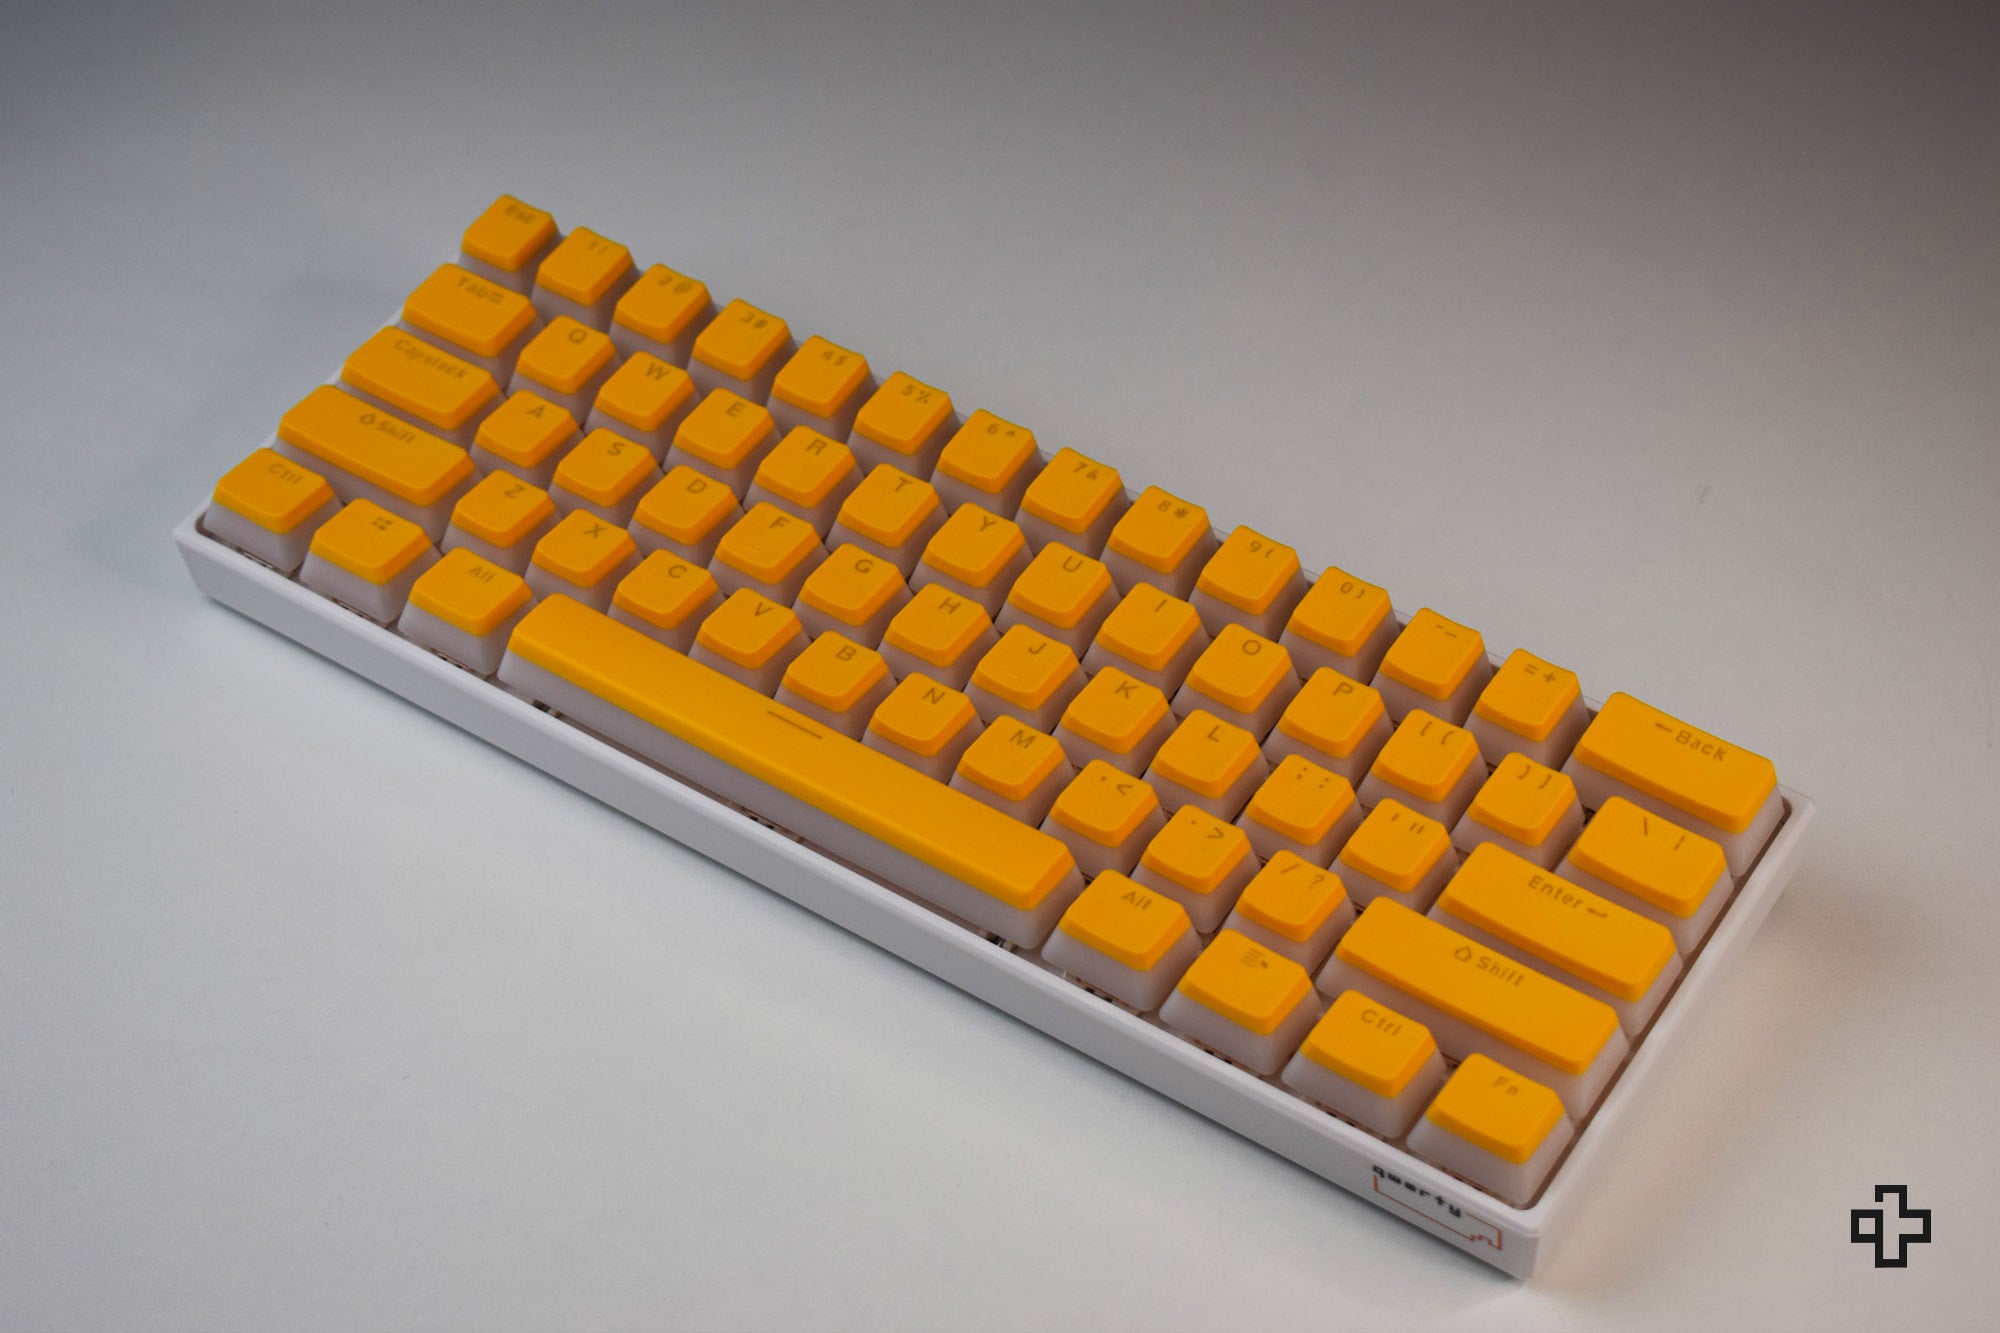 Set Taste Yellow Pudding Profil OEM Material PBT Double Shot - QwertyKey